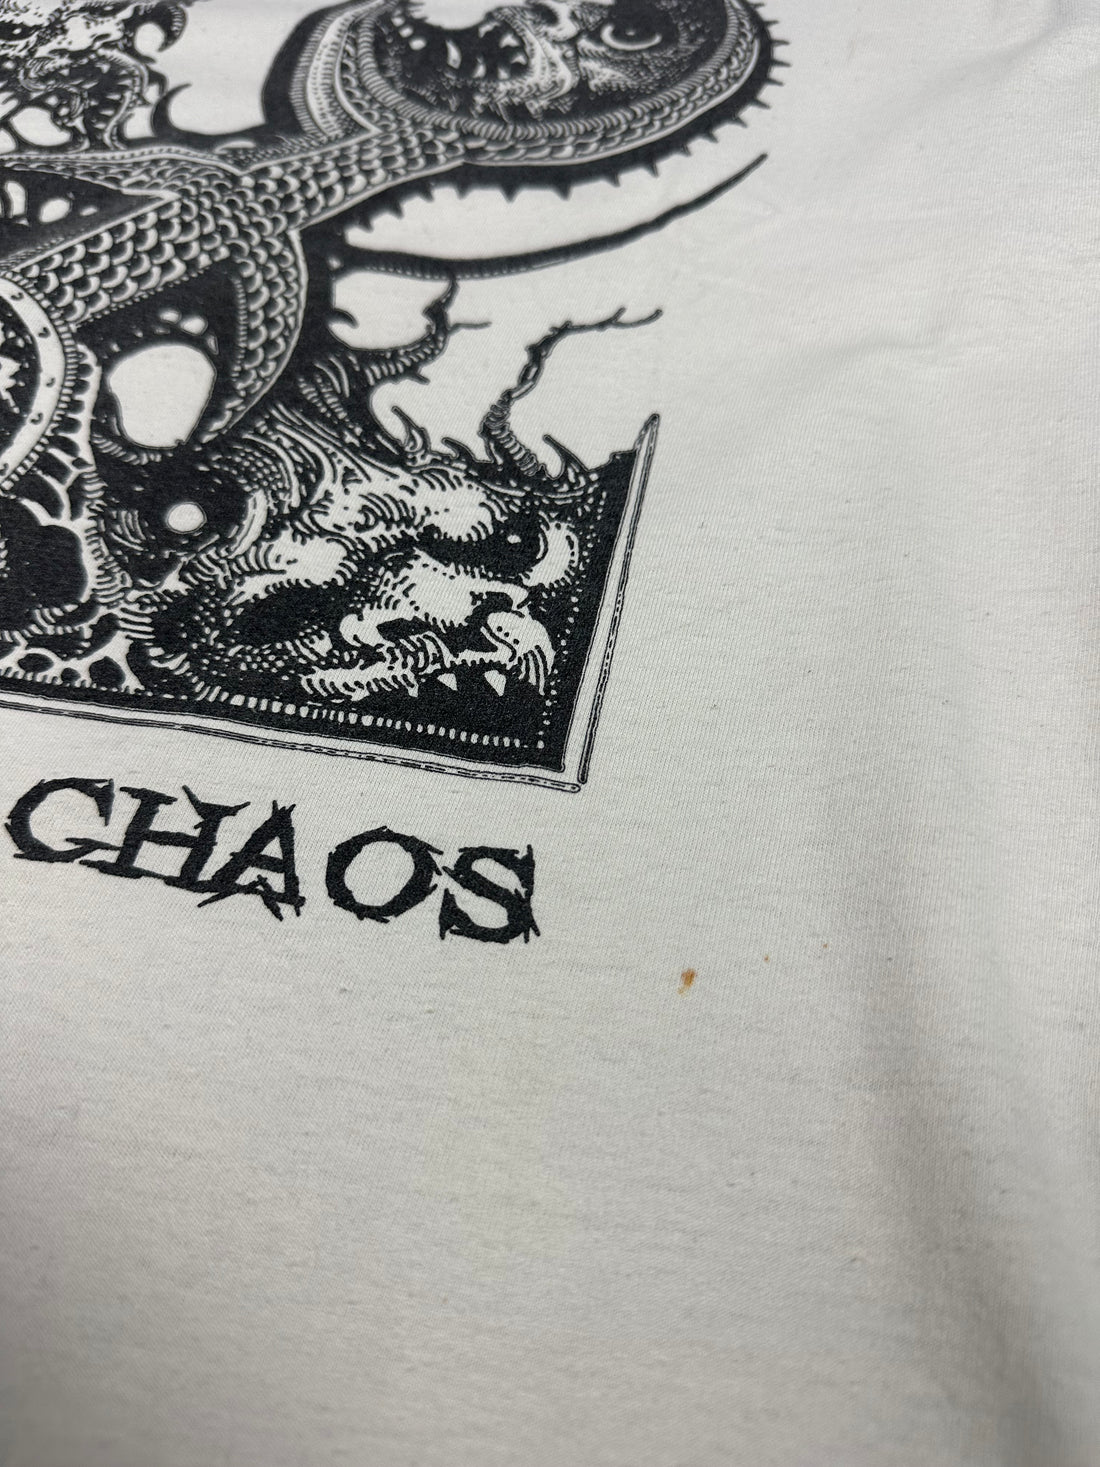 Bolt Thrower 2000s Realm Of Chaos Vintage T-Shirt